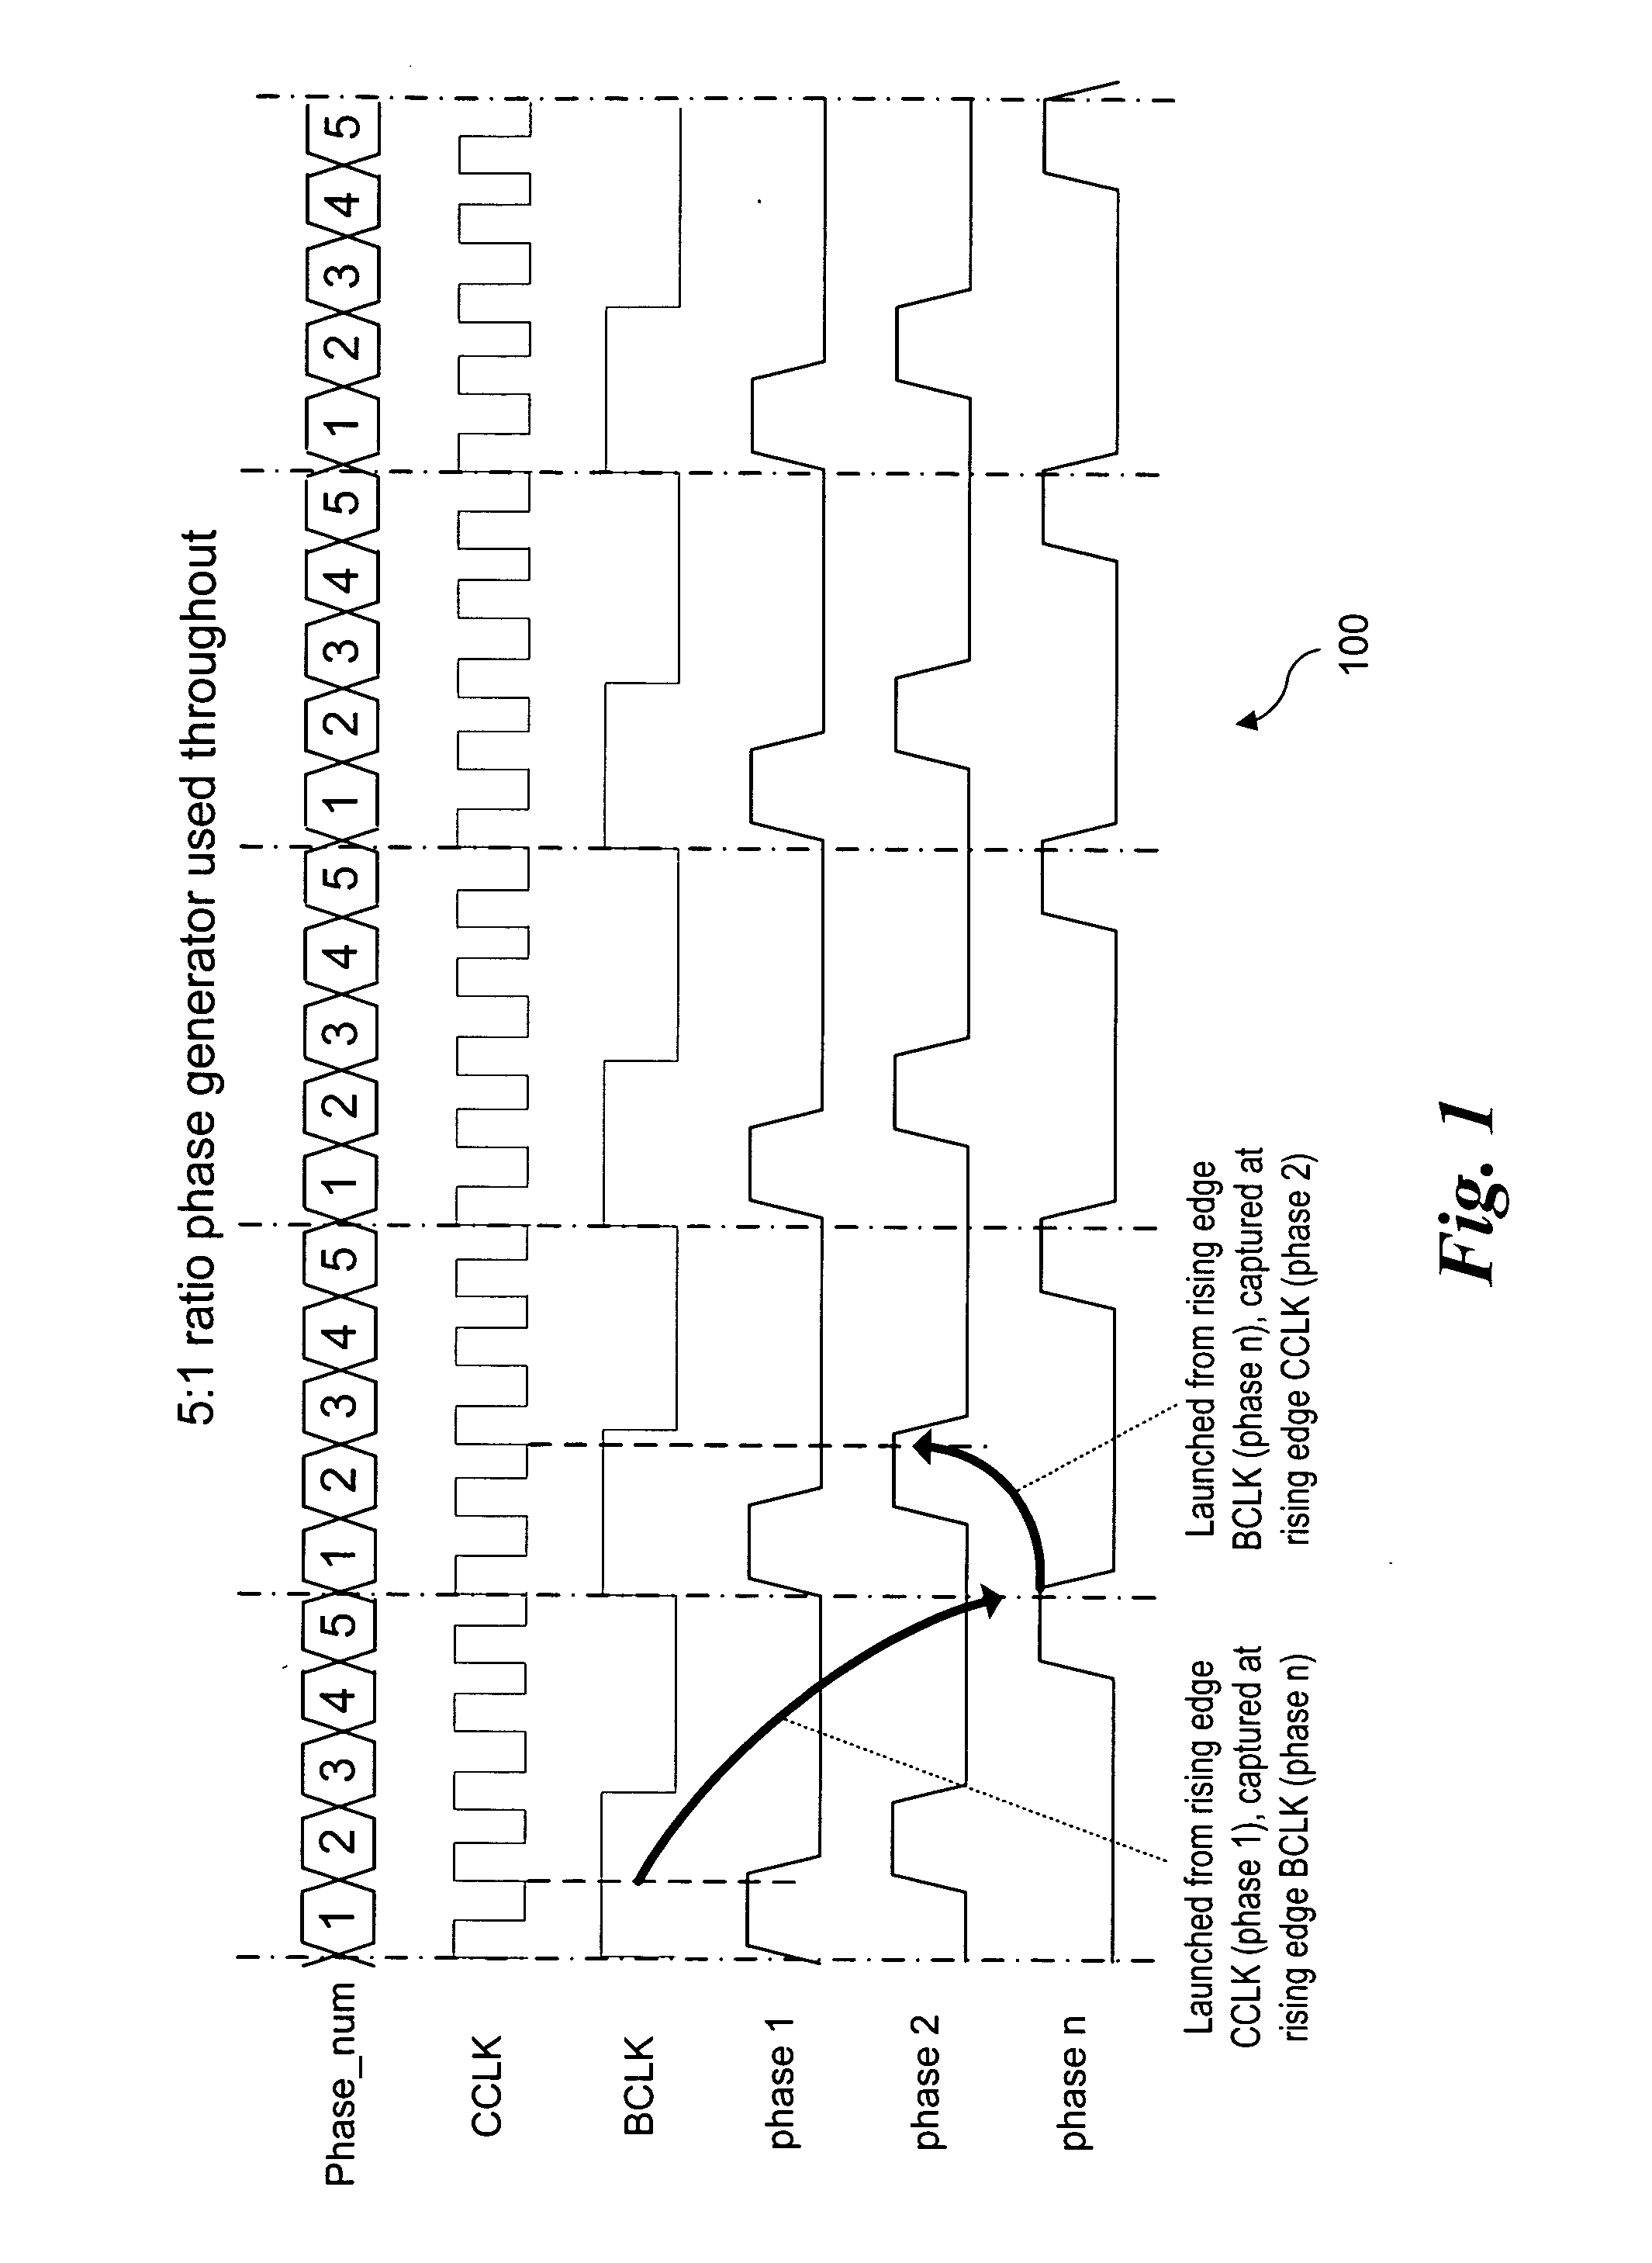 Programmable phase generator for cross-clock communication where the clock frequency ratio is a rational number